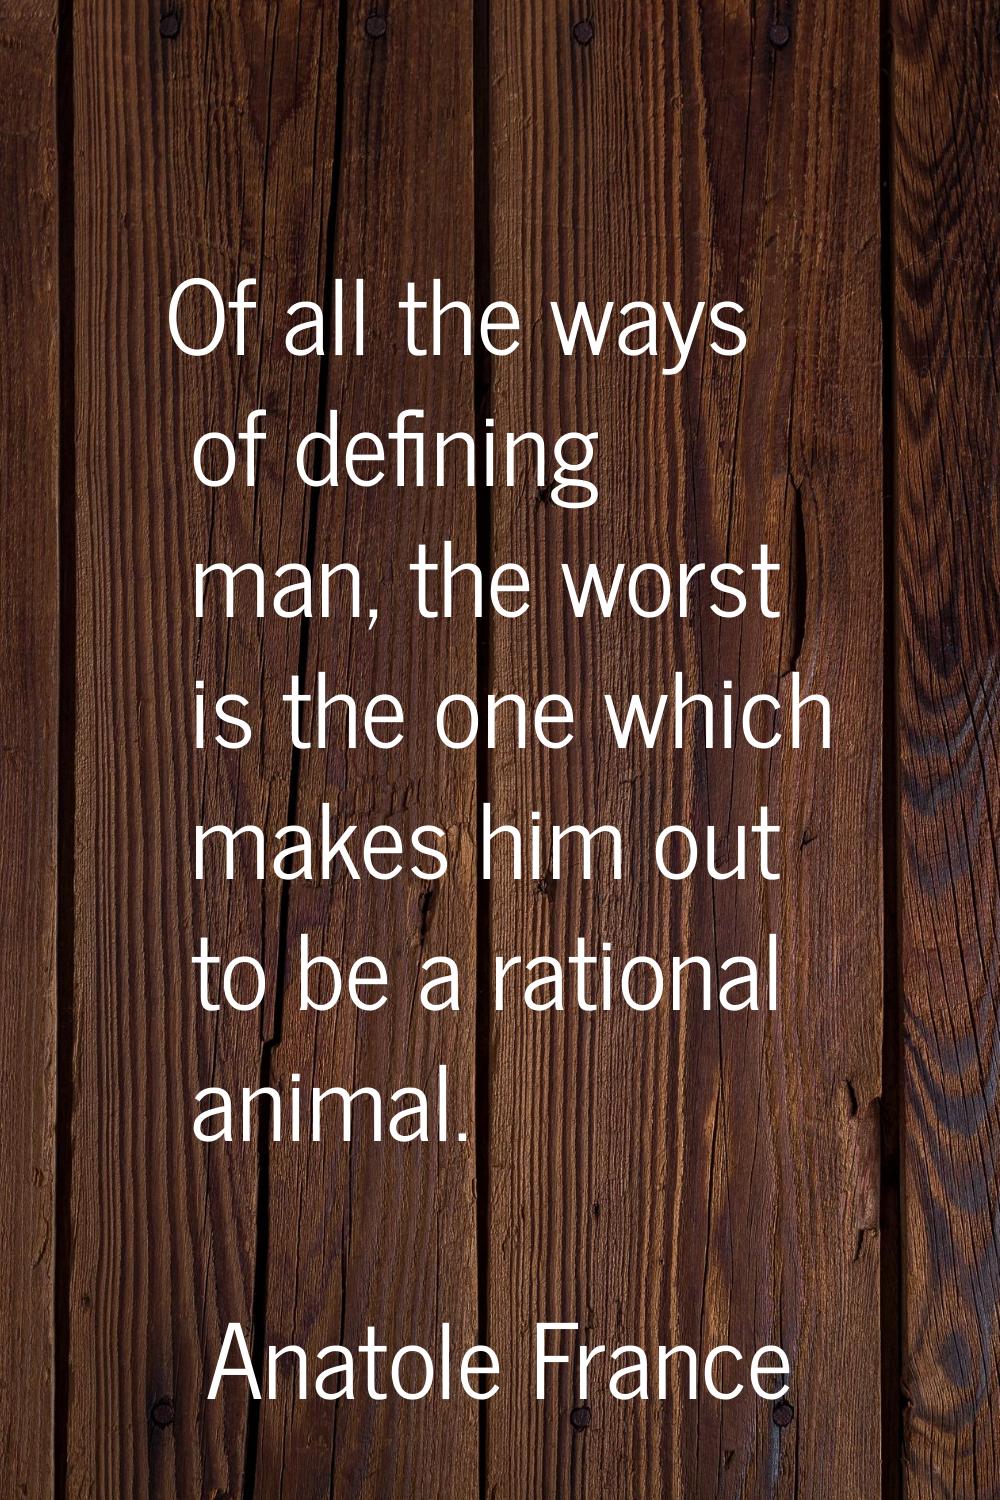 Of all the ways of defining man, the worst is the one which makes him out to be a rational animal.